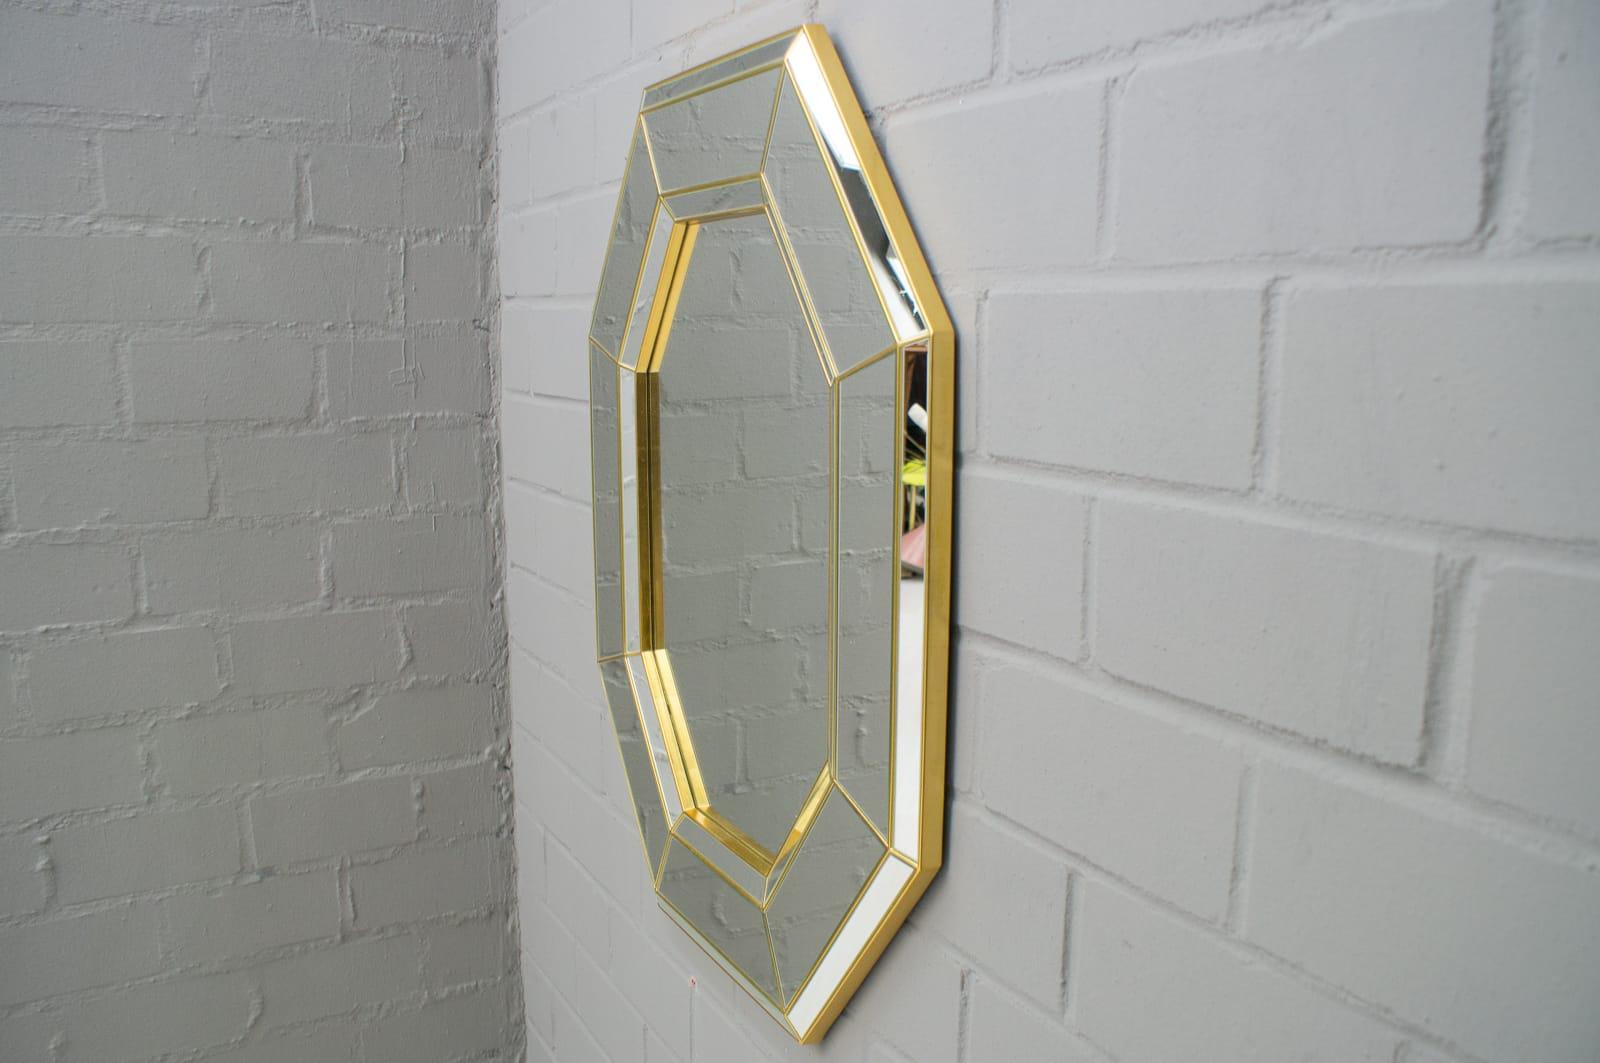 Belgian Large Octagonal Wall Mirror in Gold, Belgium, 1990s For Sale